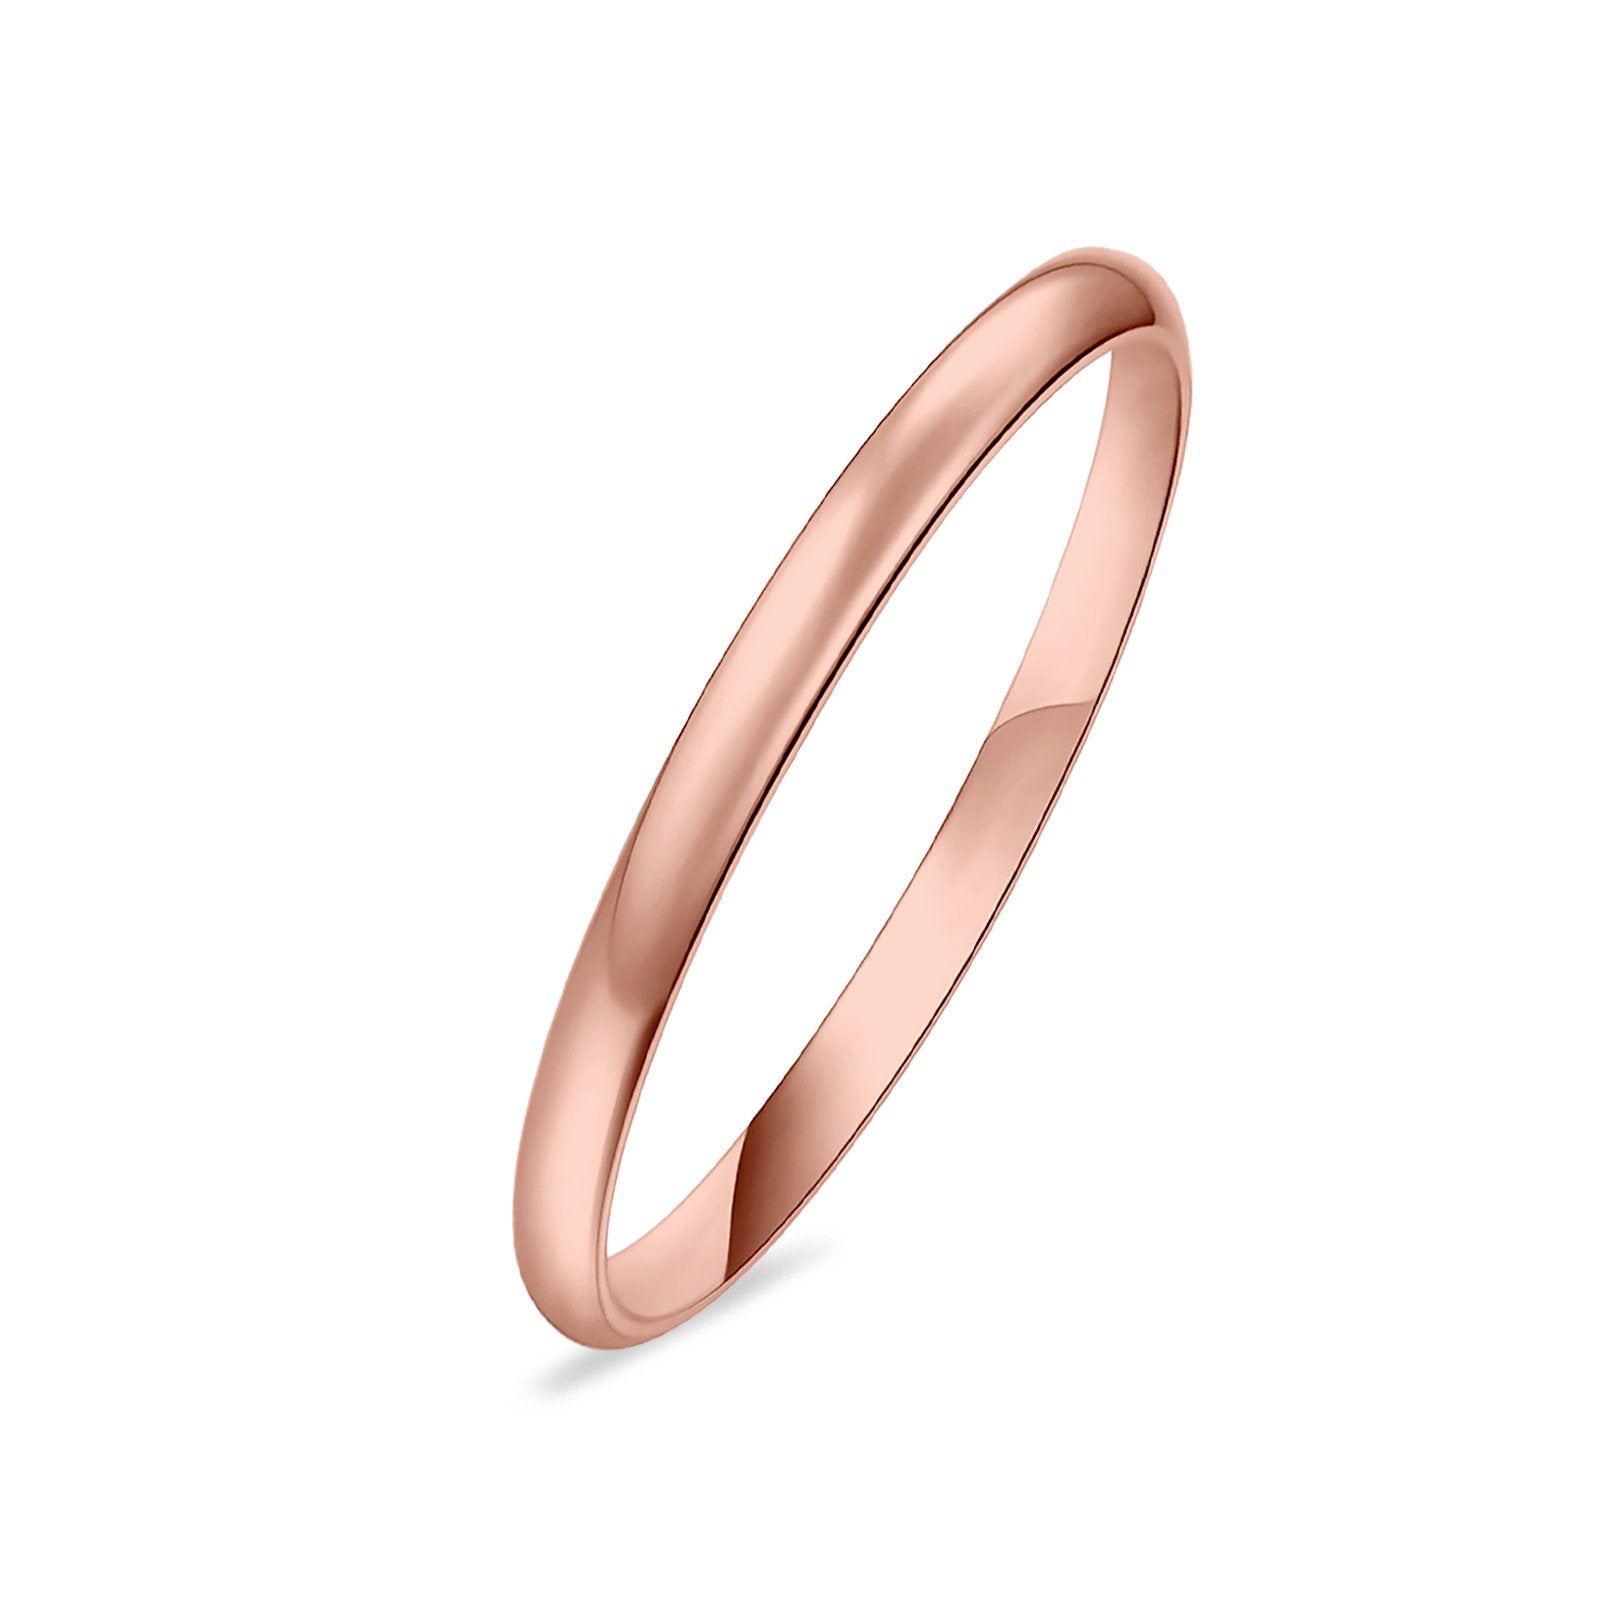 Rose Tone Wedding Band Ring Round 925 Sterling Silver (2mm)